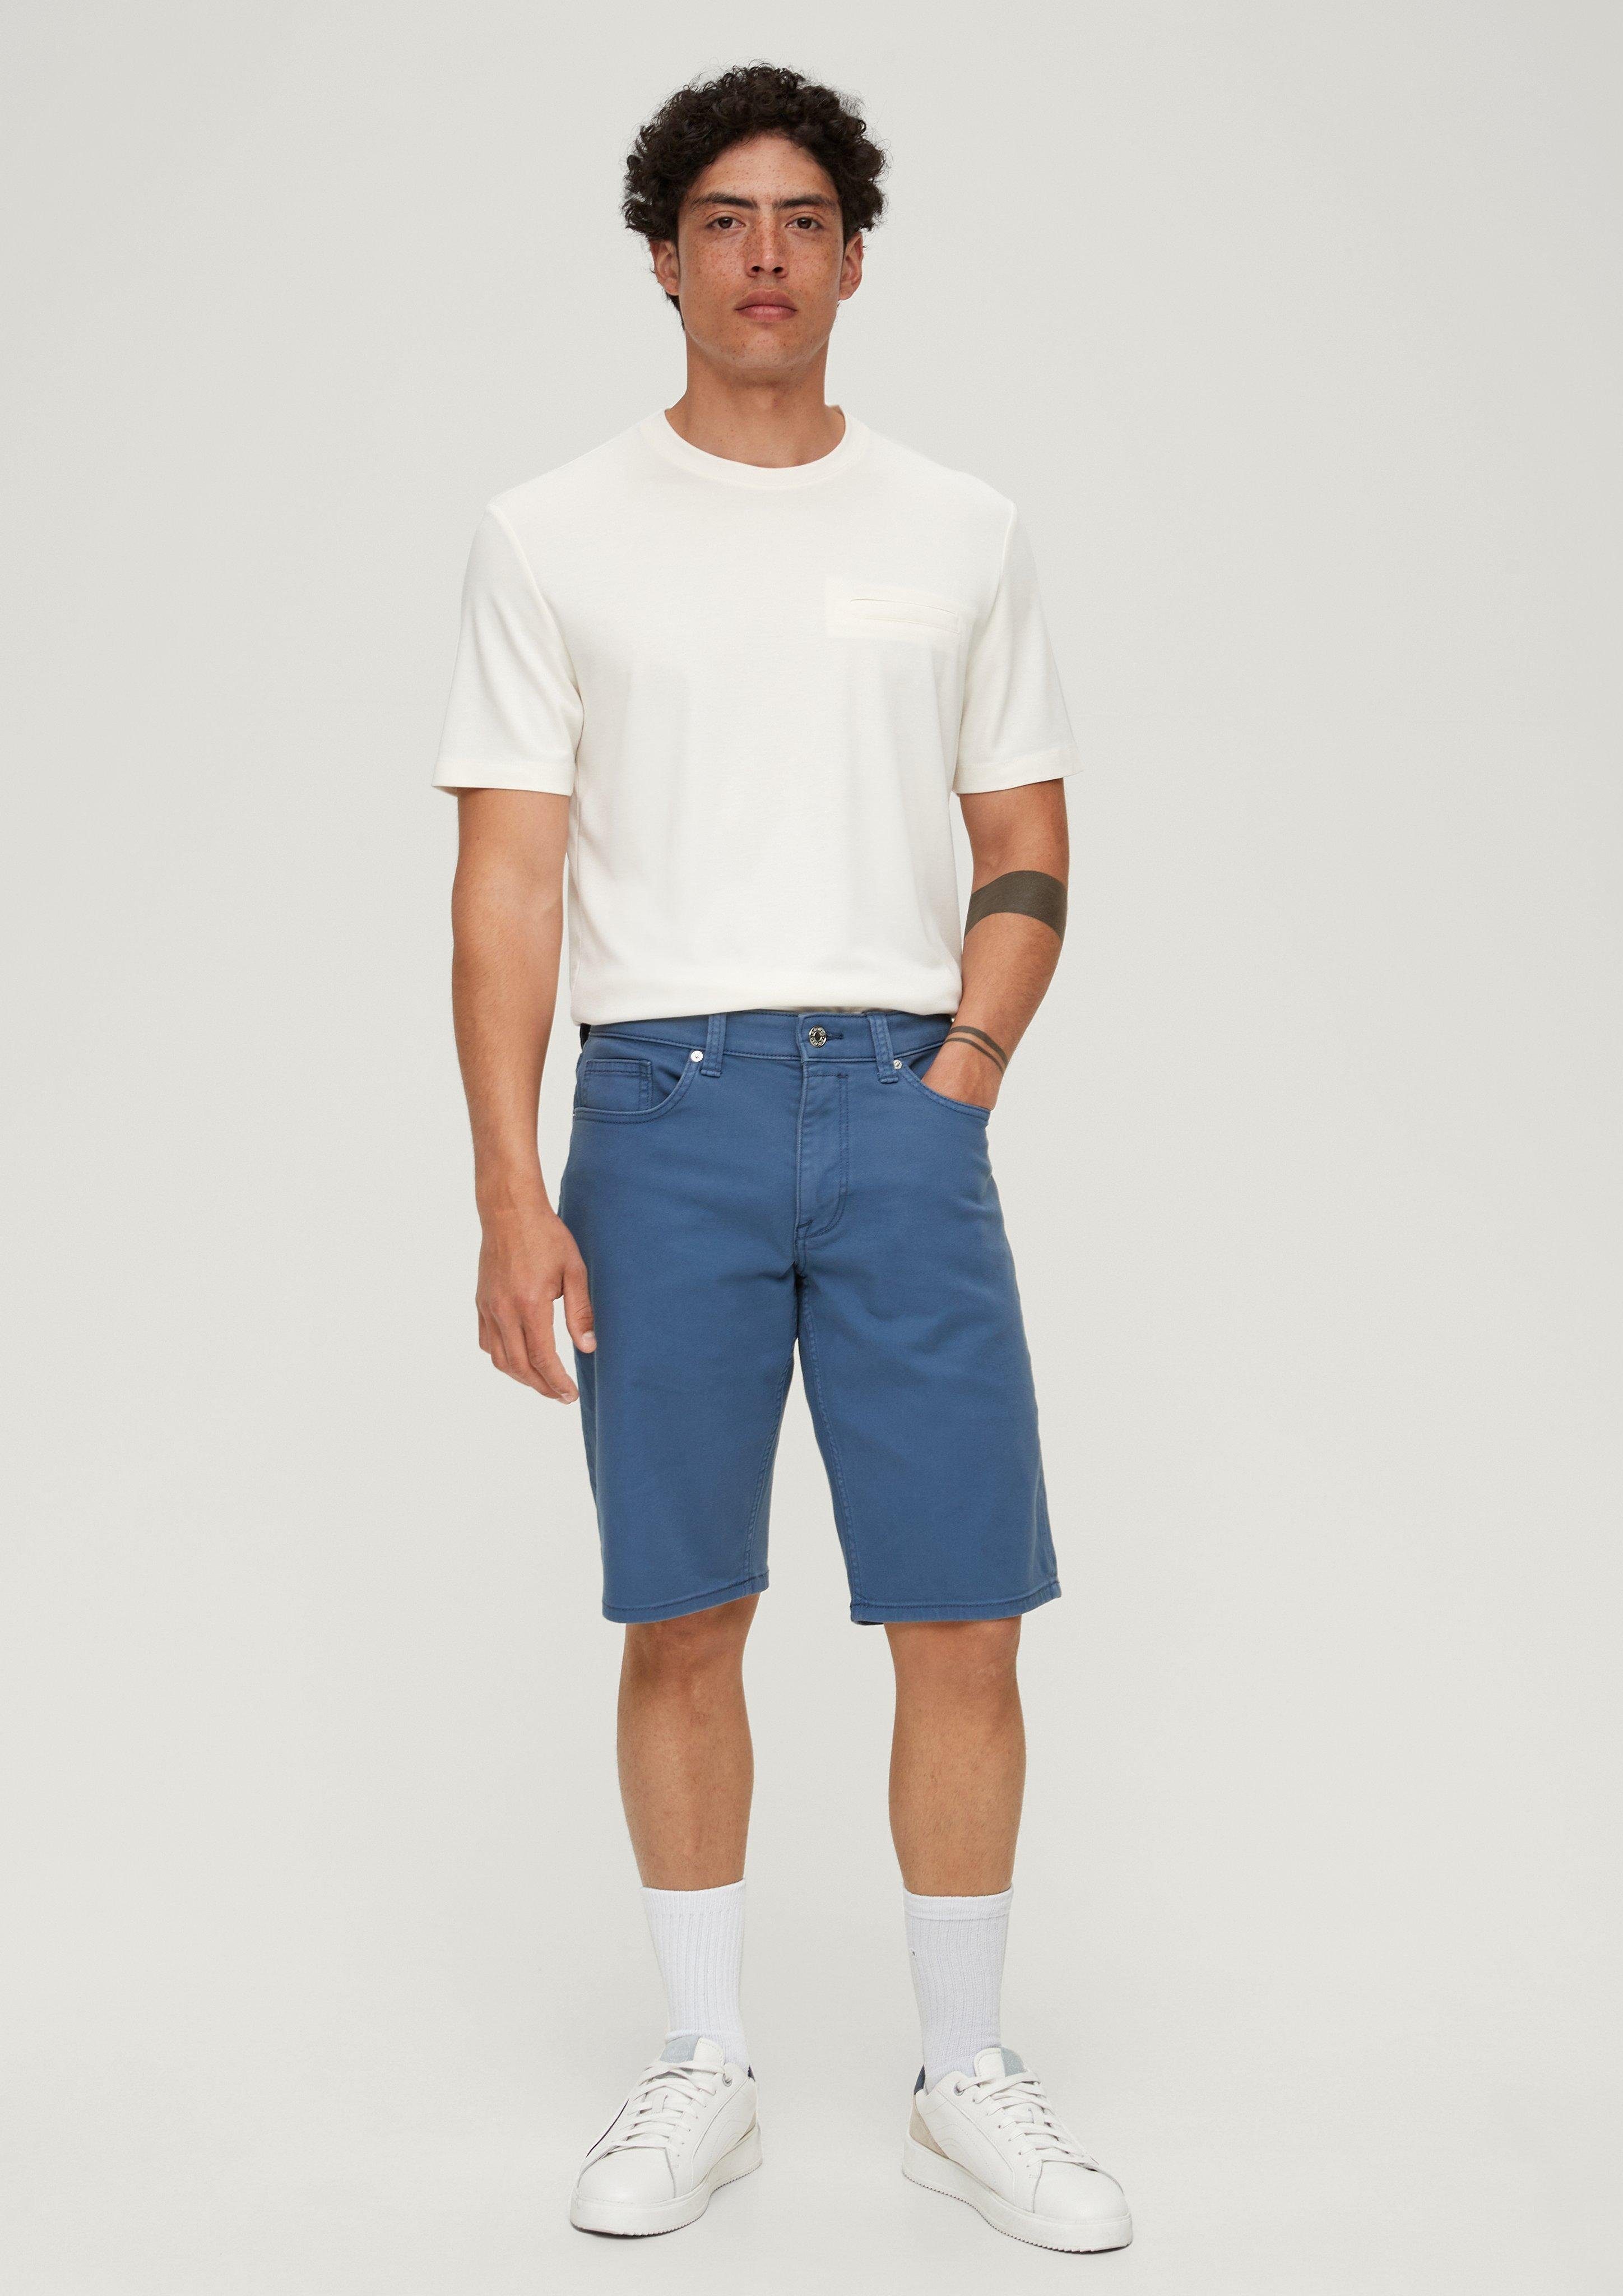 Jeans-Shorts Rise / Fit Leg / Regular Jeansshorts blau Label-Patch / s.Oliver High Straight